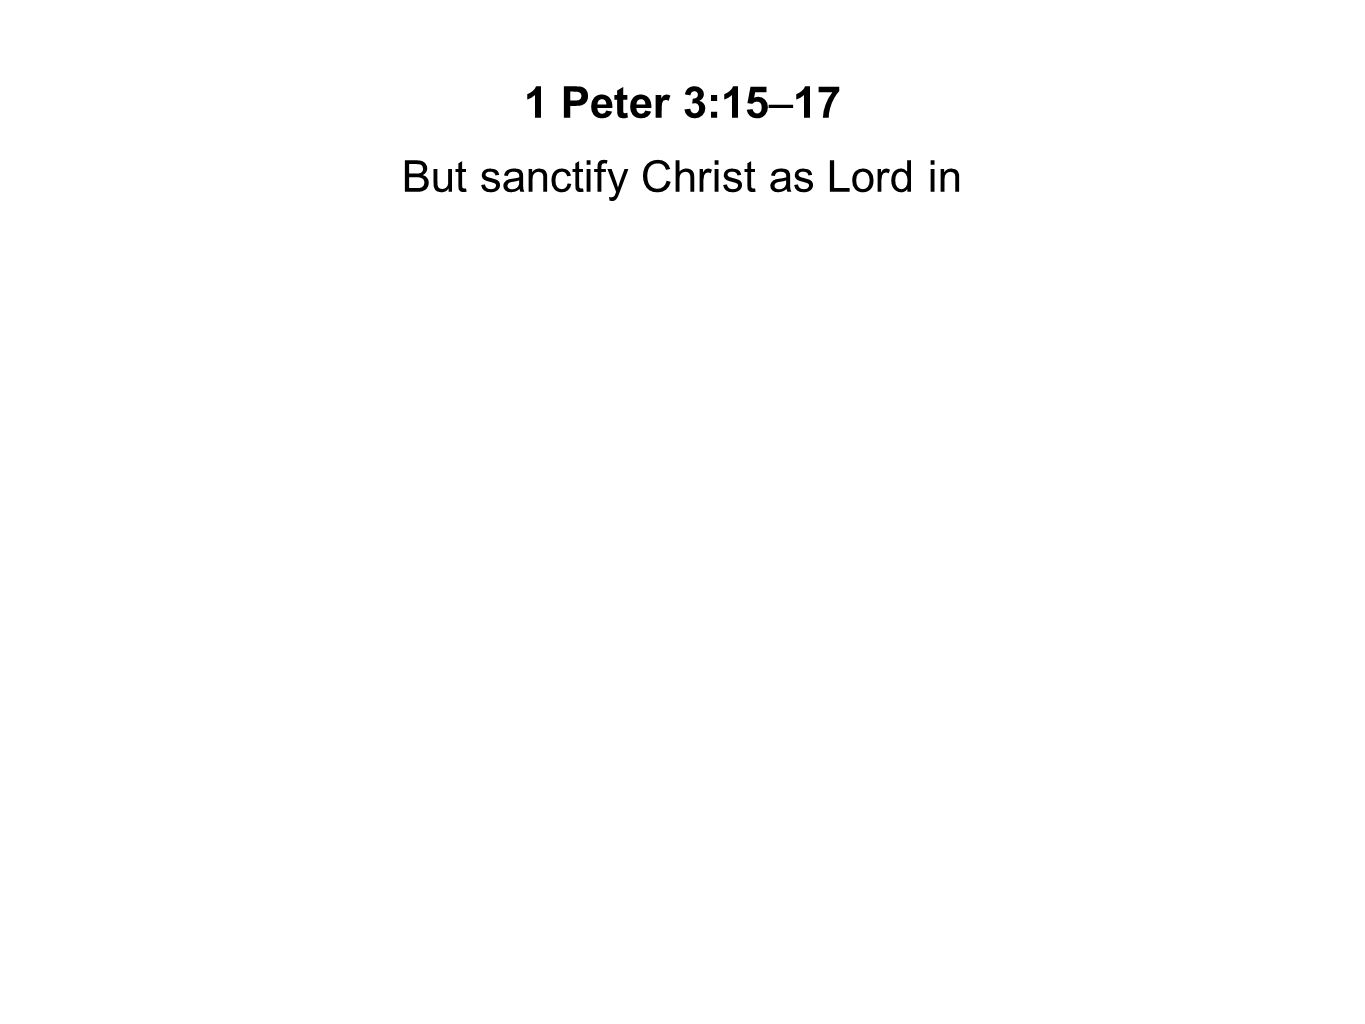 But sanctify Christ as Lord in